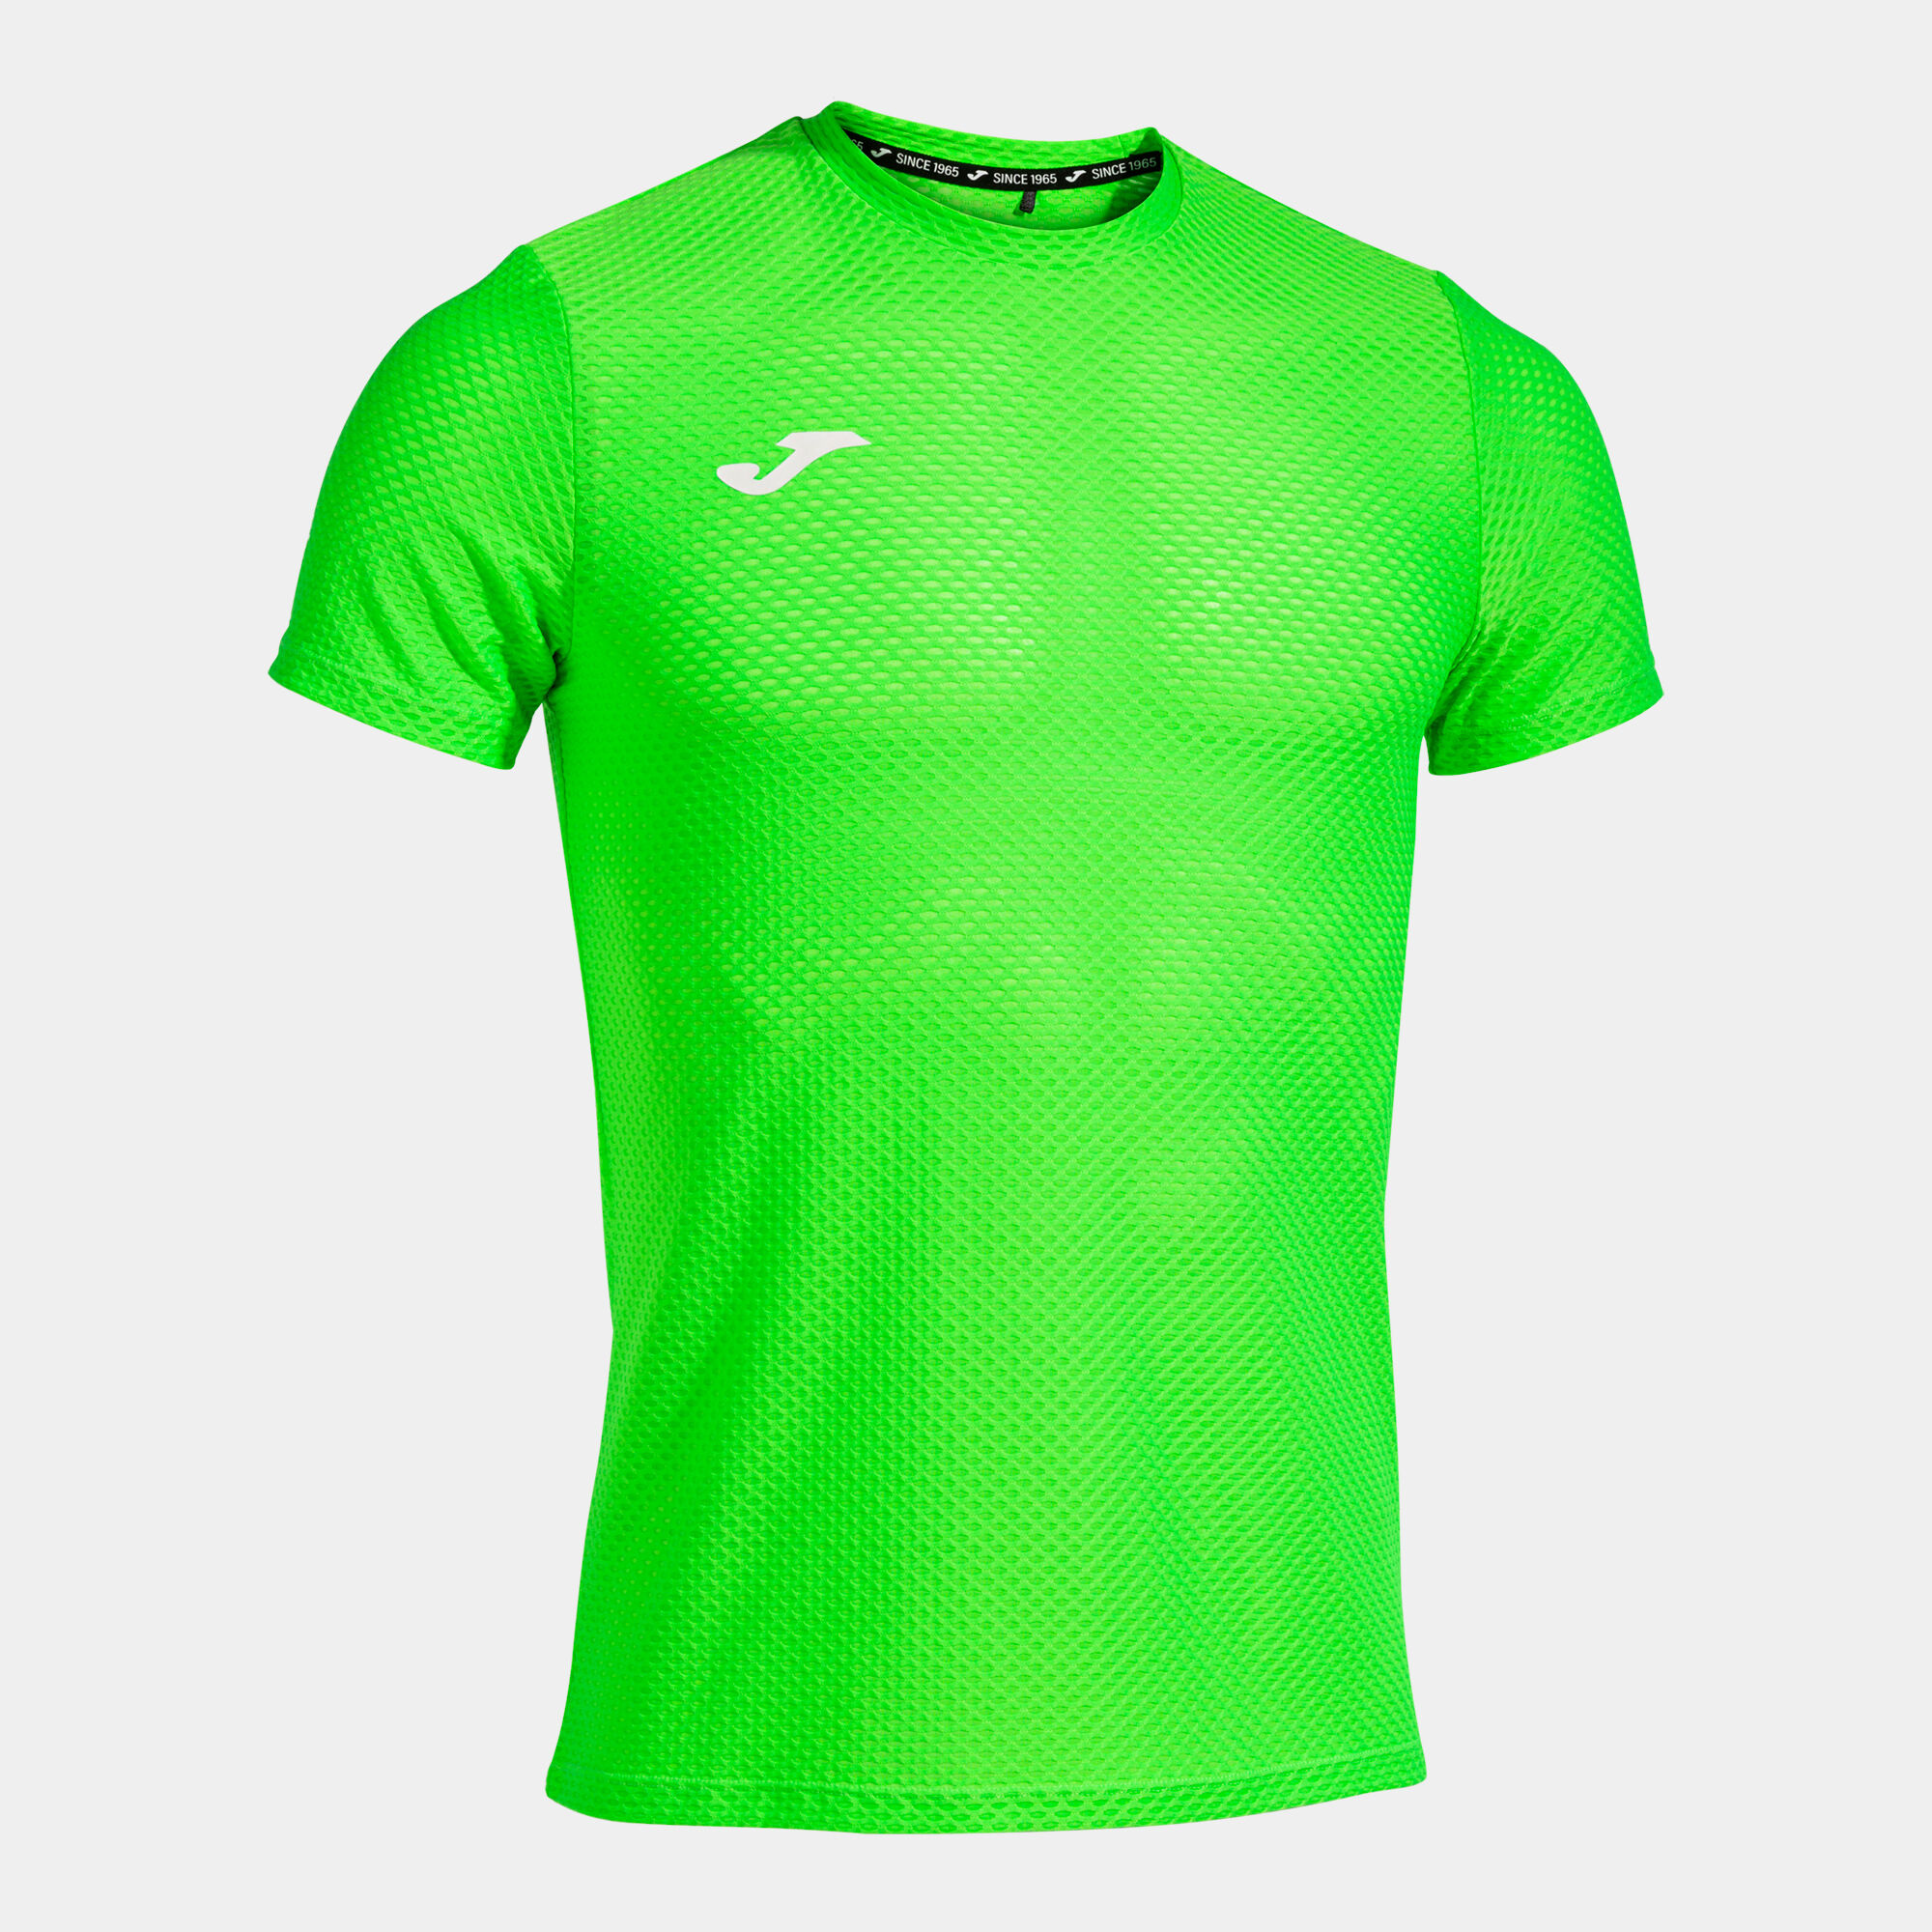 Maillot manches courtes homme R-City vert fluo